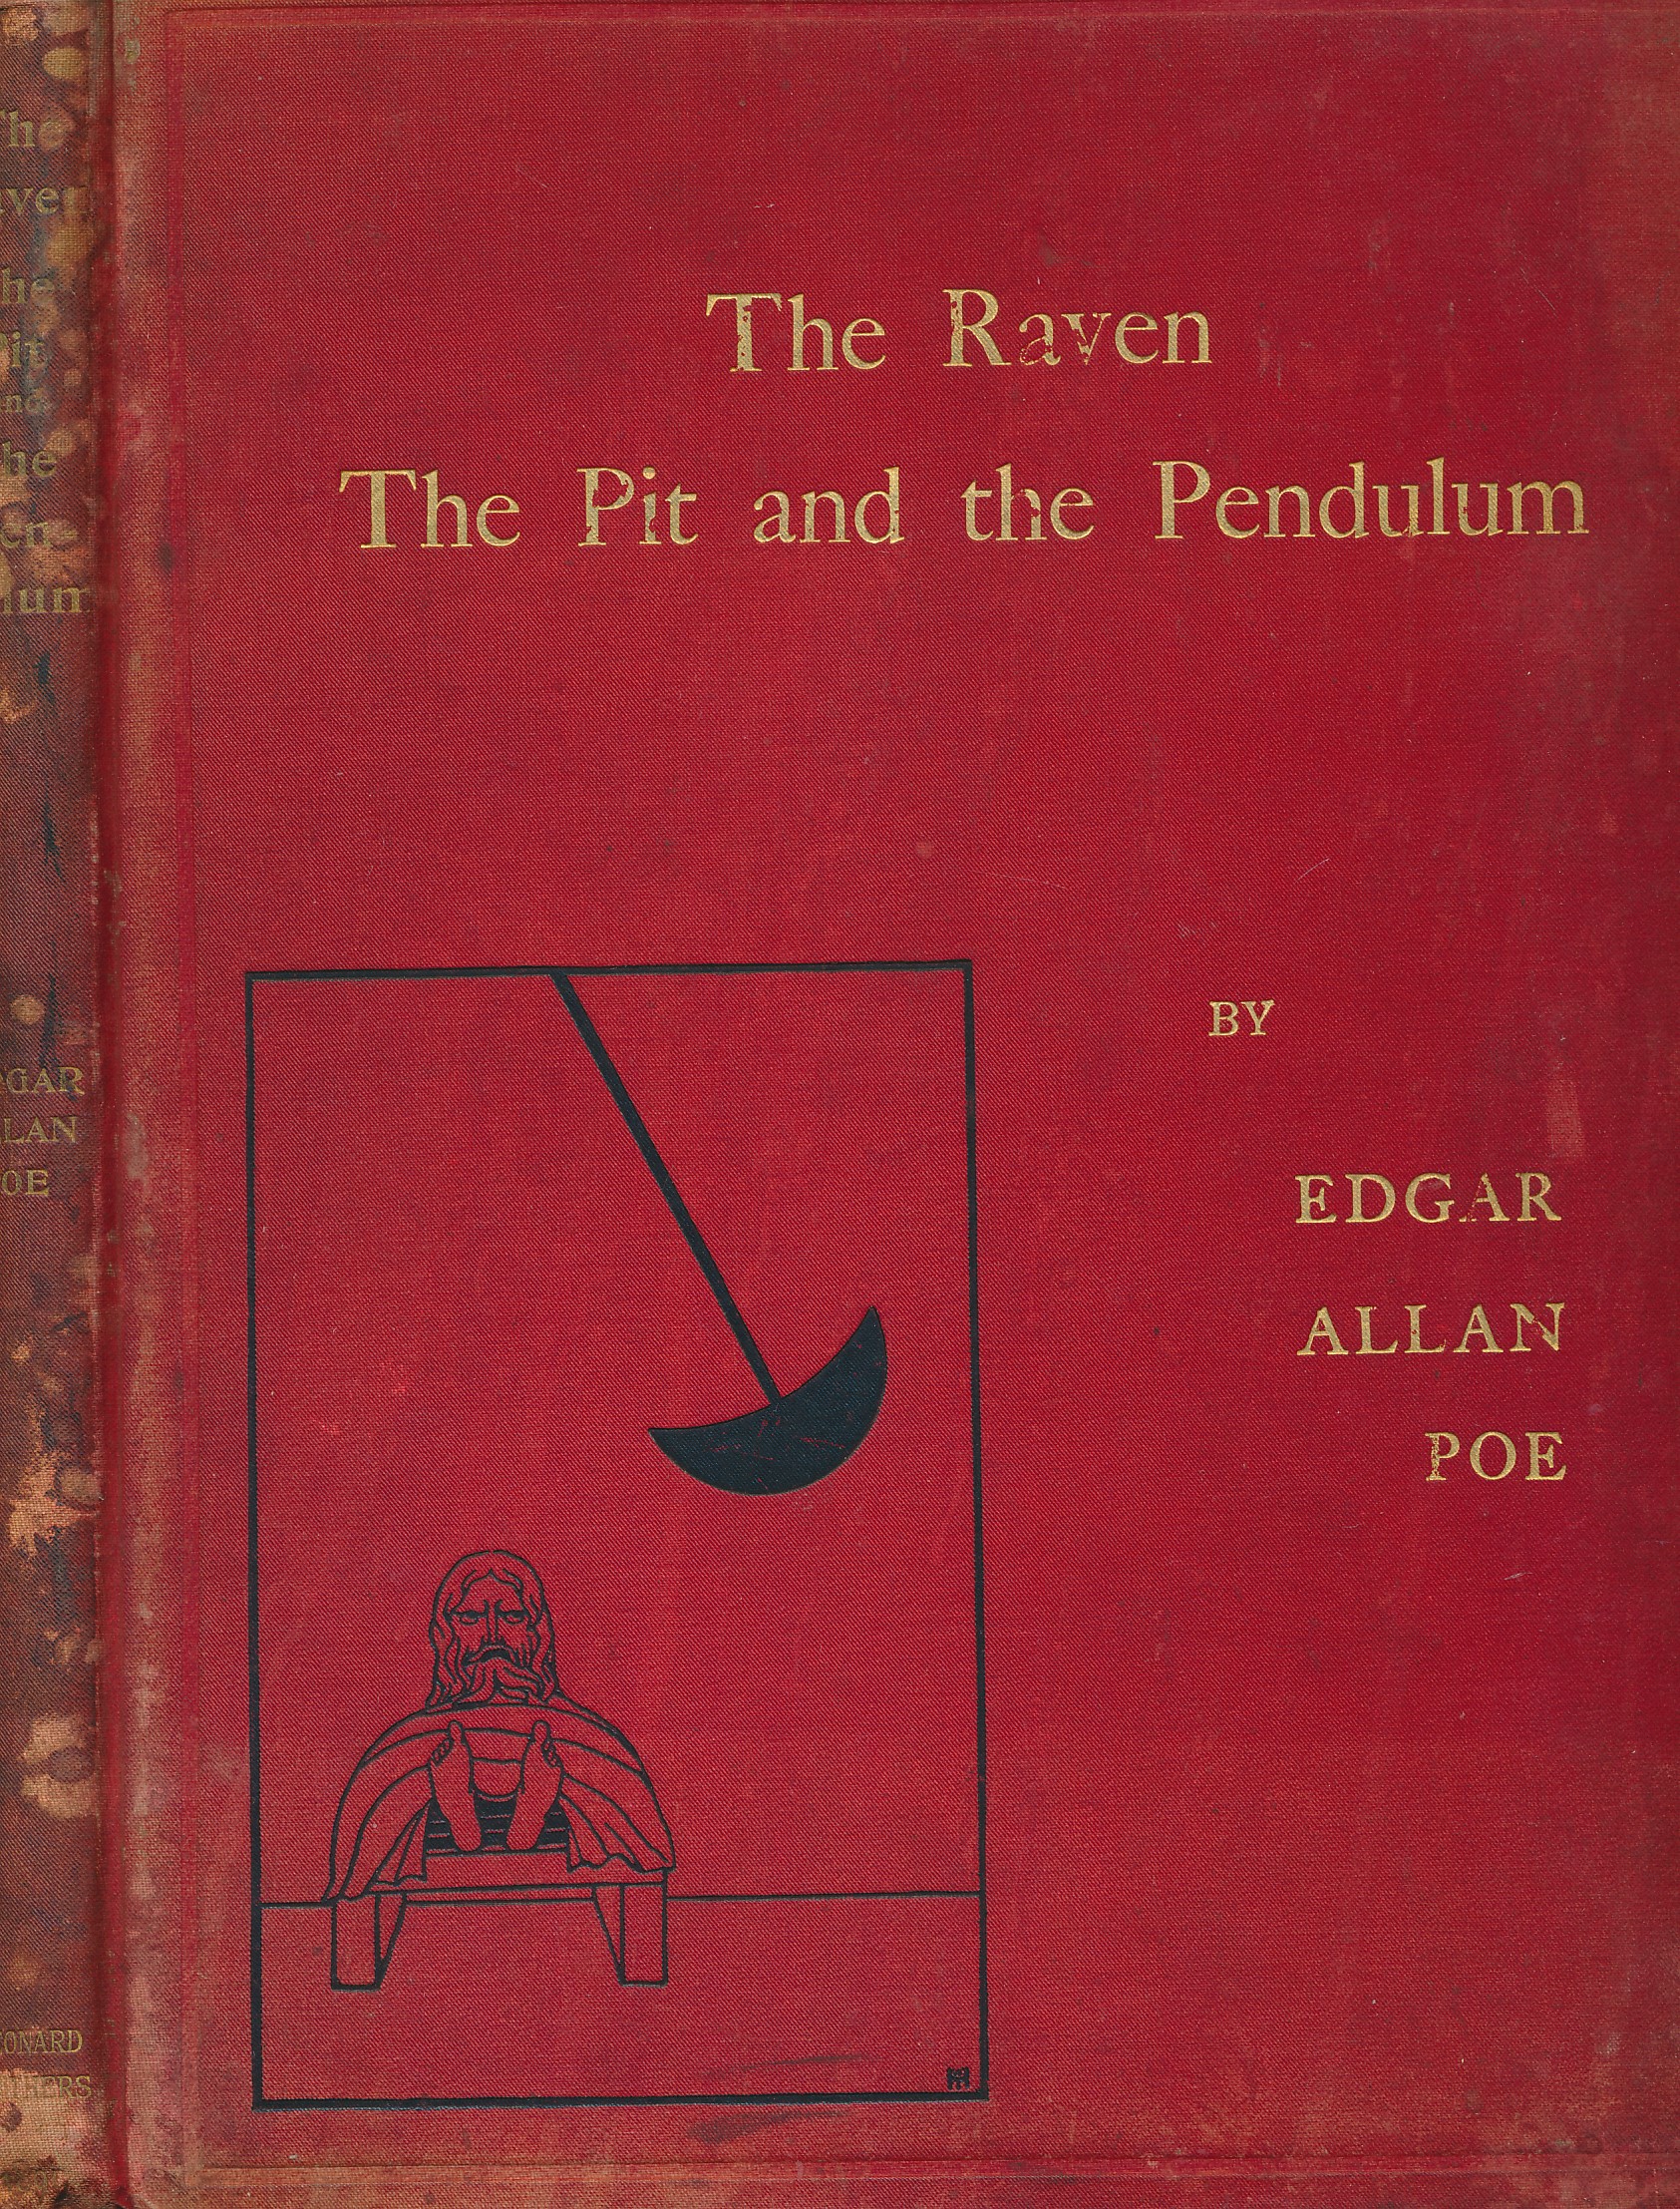 The Raven and The Pit and the Pendulum